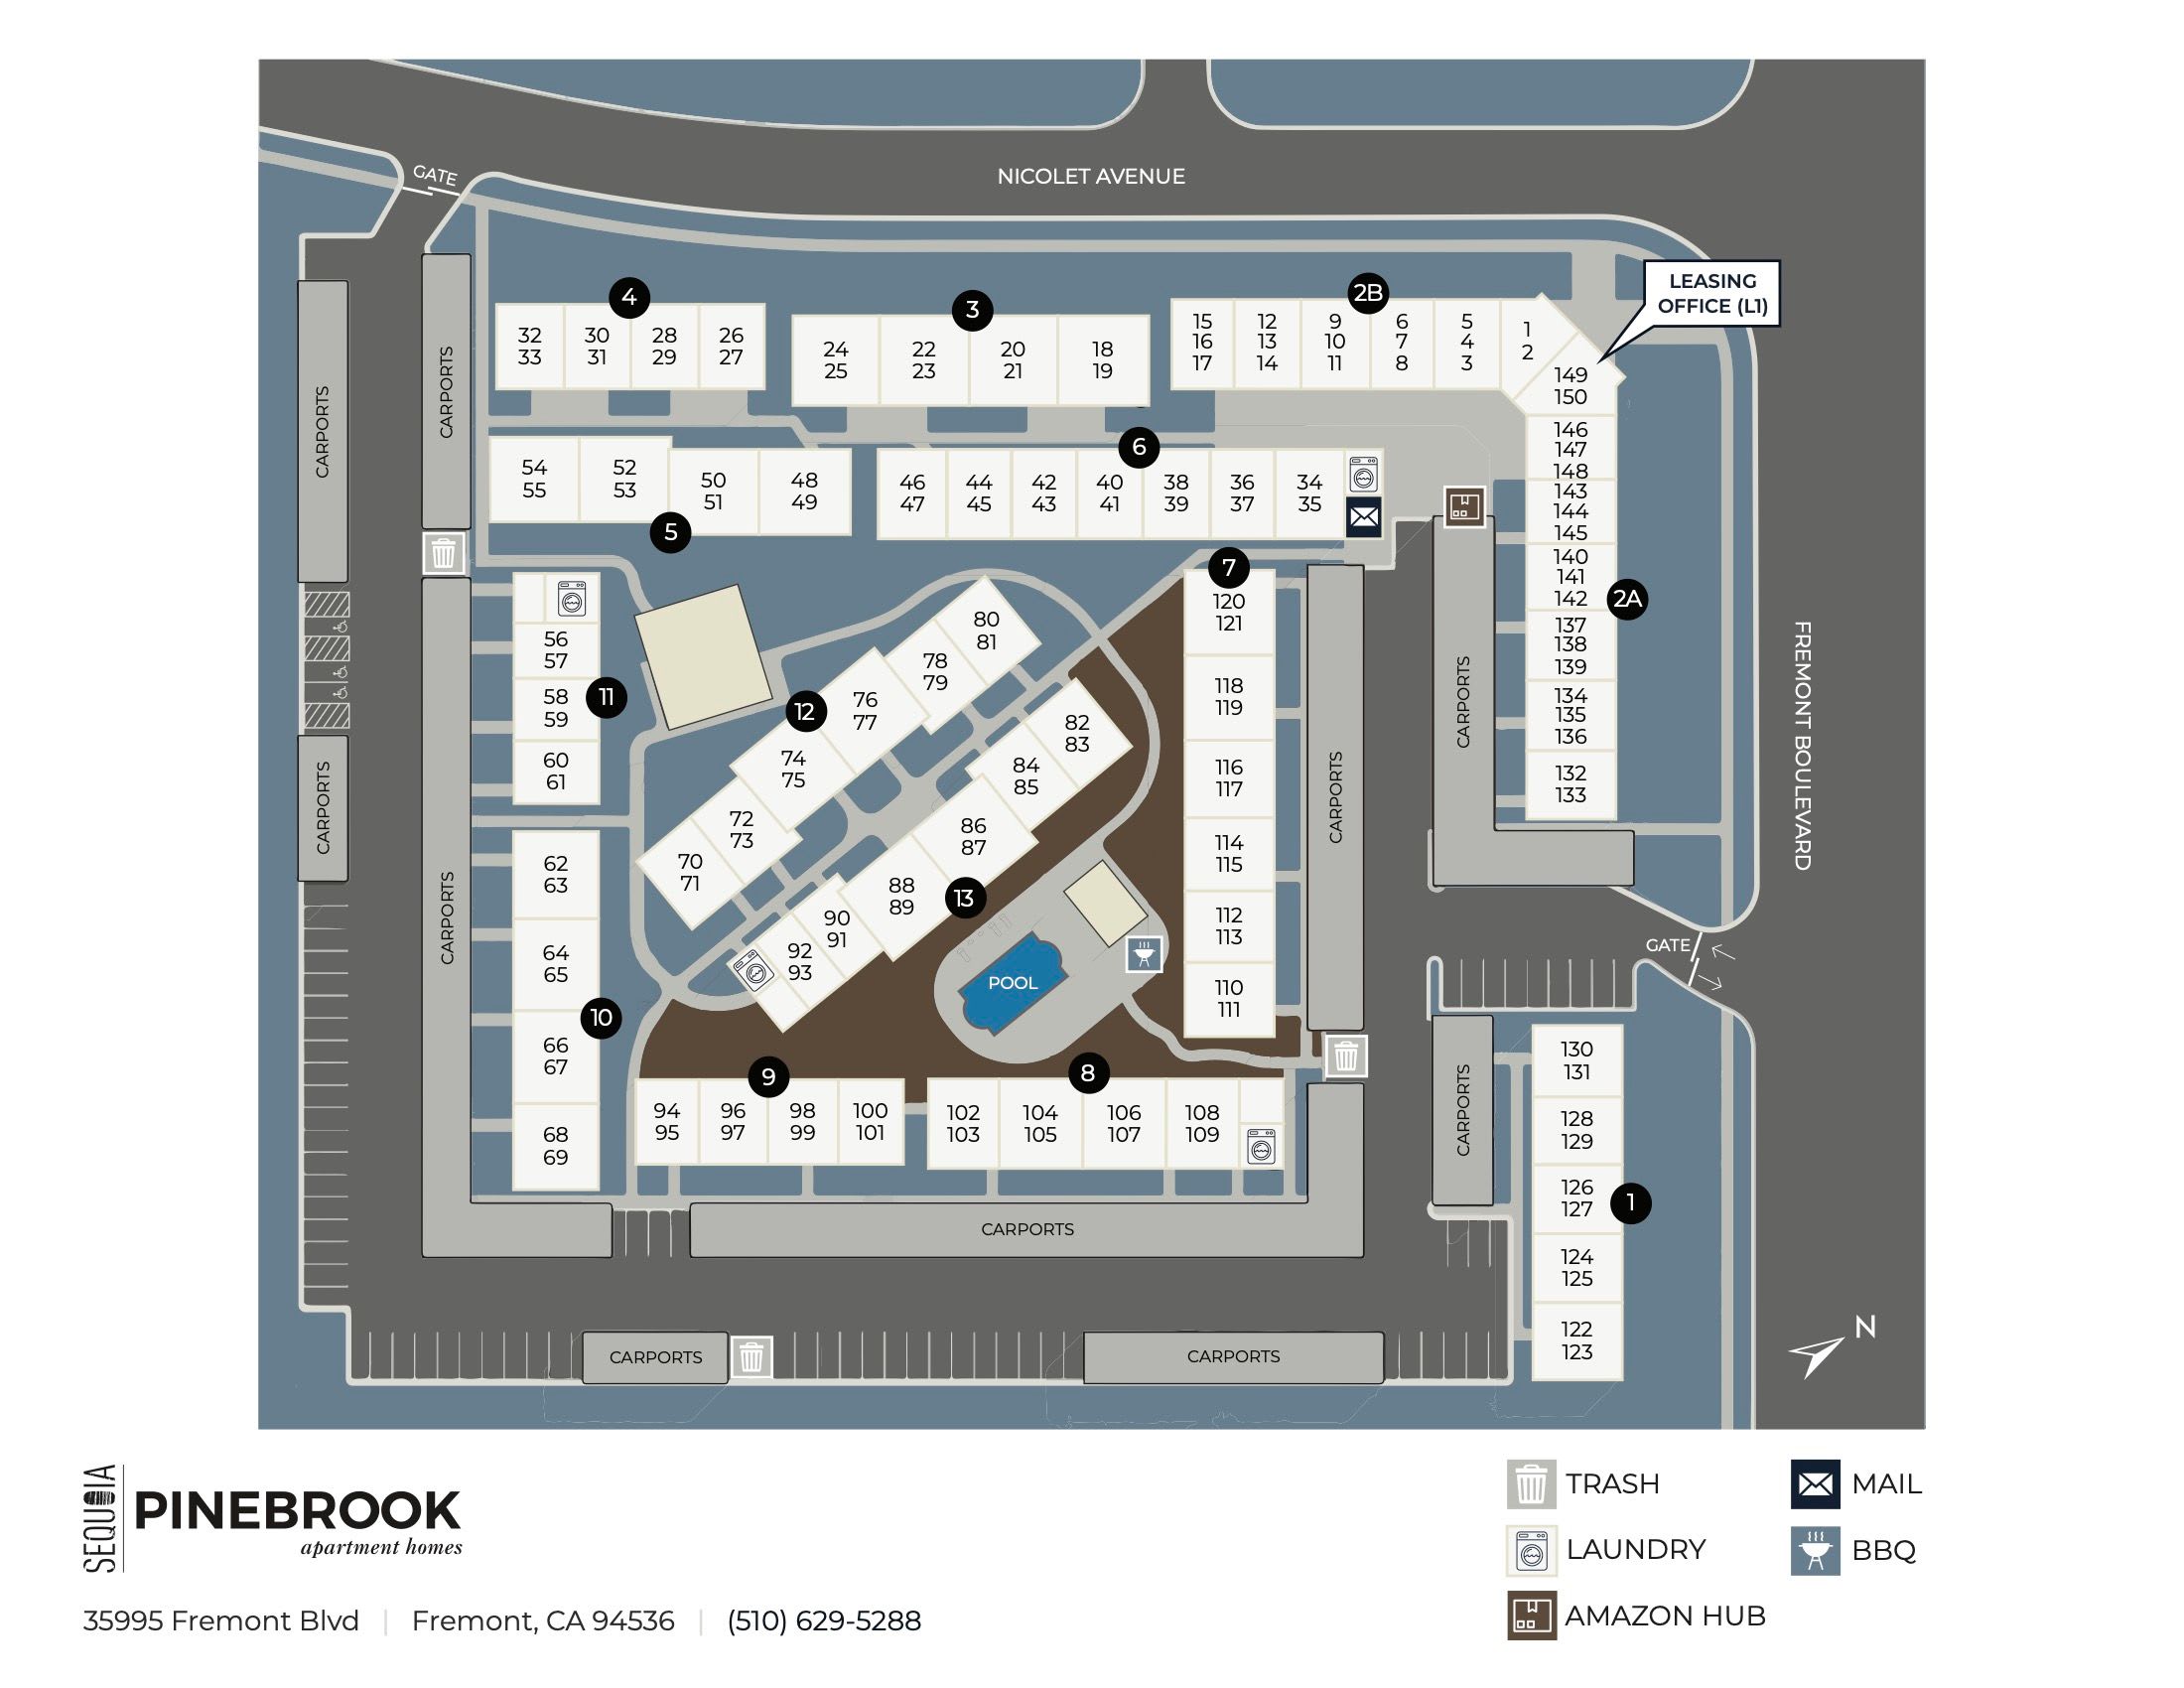 Community site map for Pinebrook Apartment Homes in Fremont, California